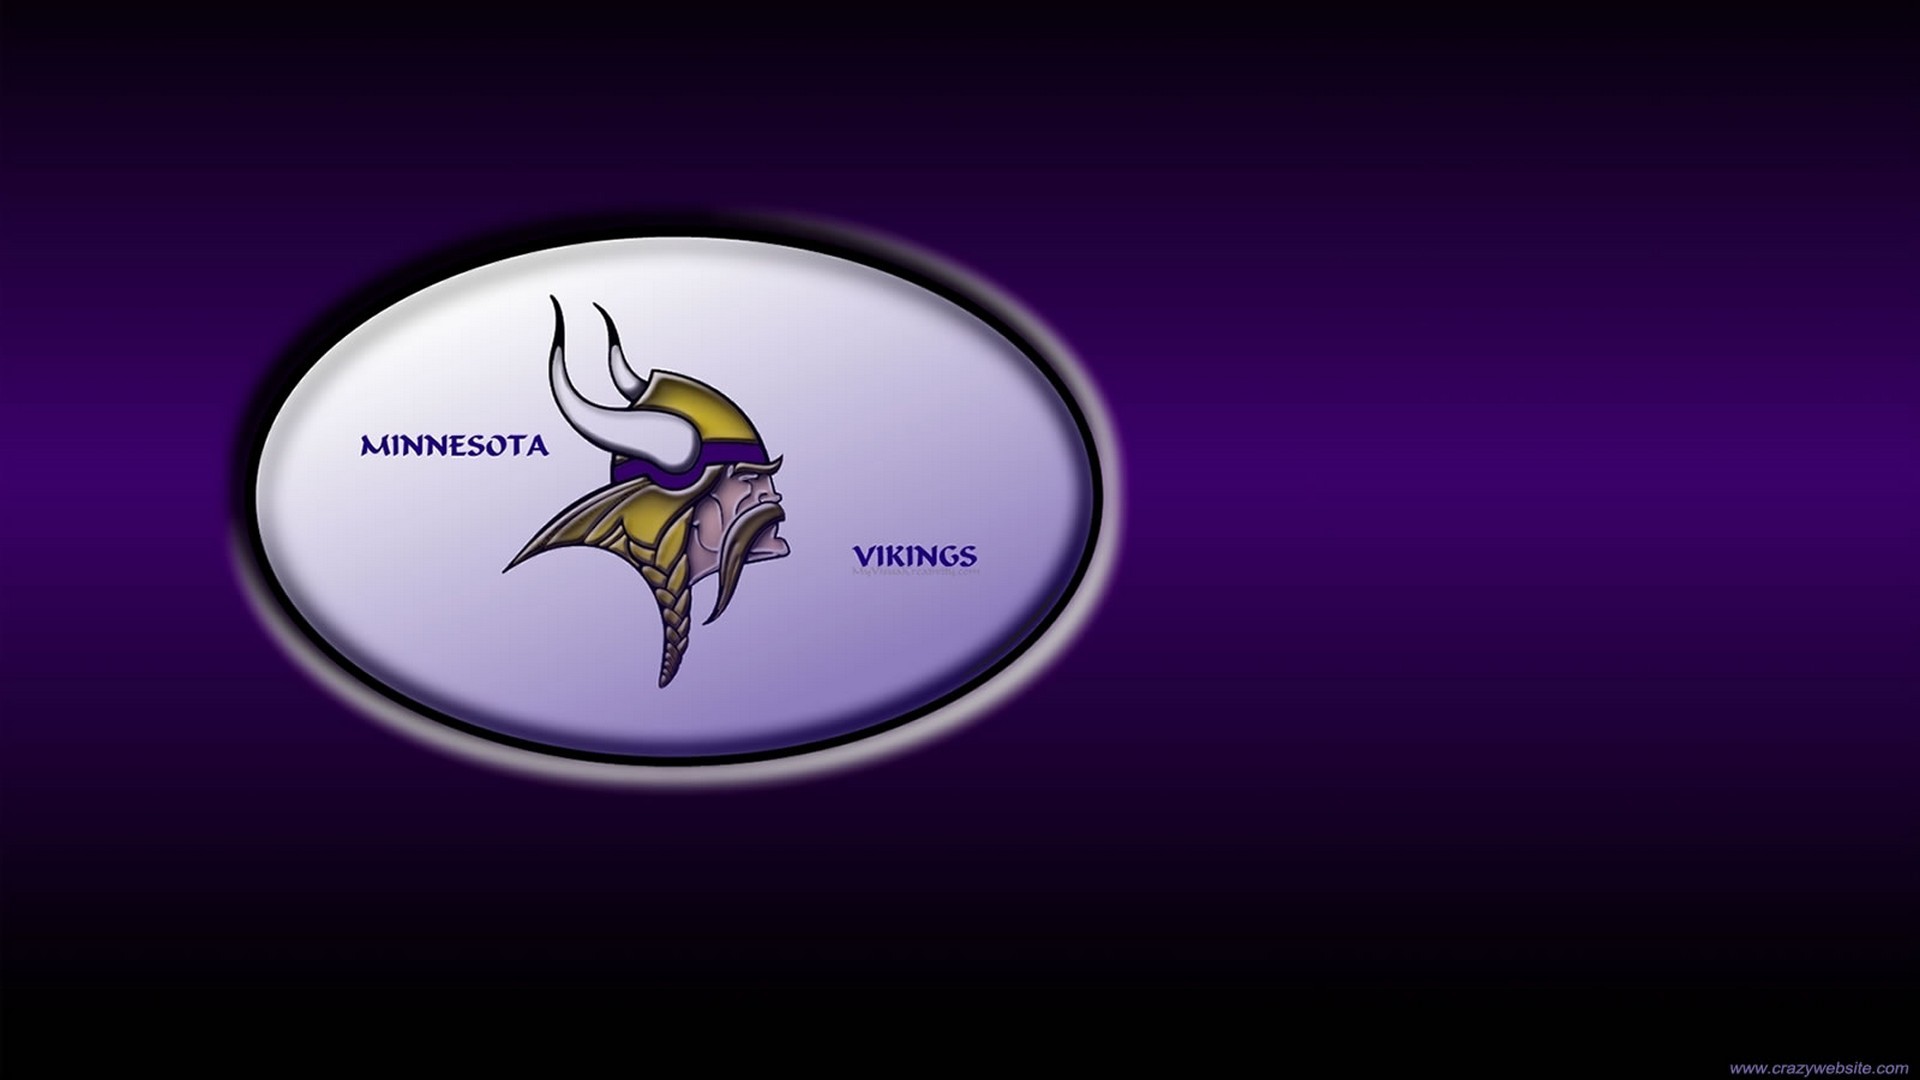 1920x1080 Minnesota Vikings Desktop Wallpapers with resolution  pixel. You  can make this wallpaper for your